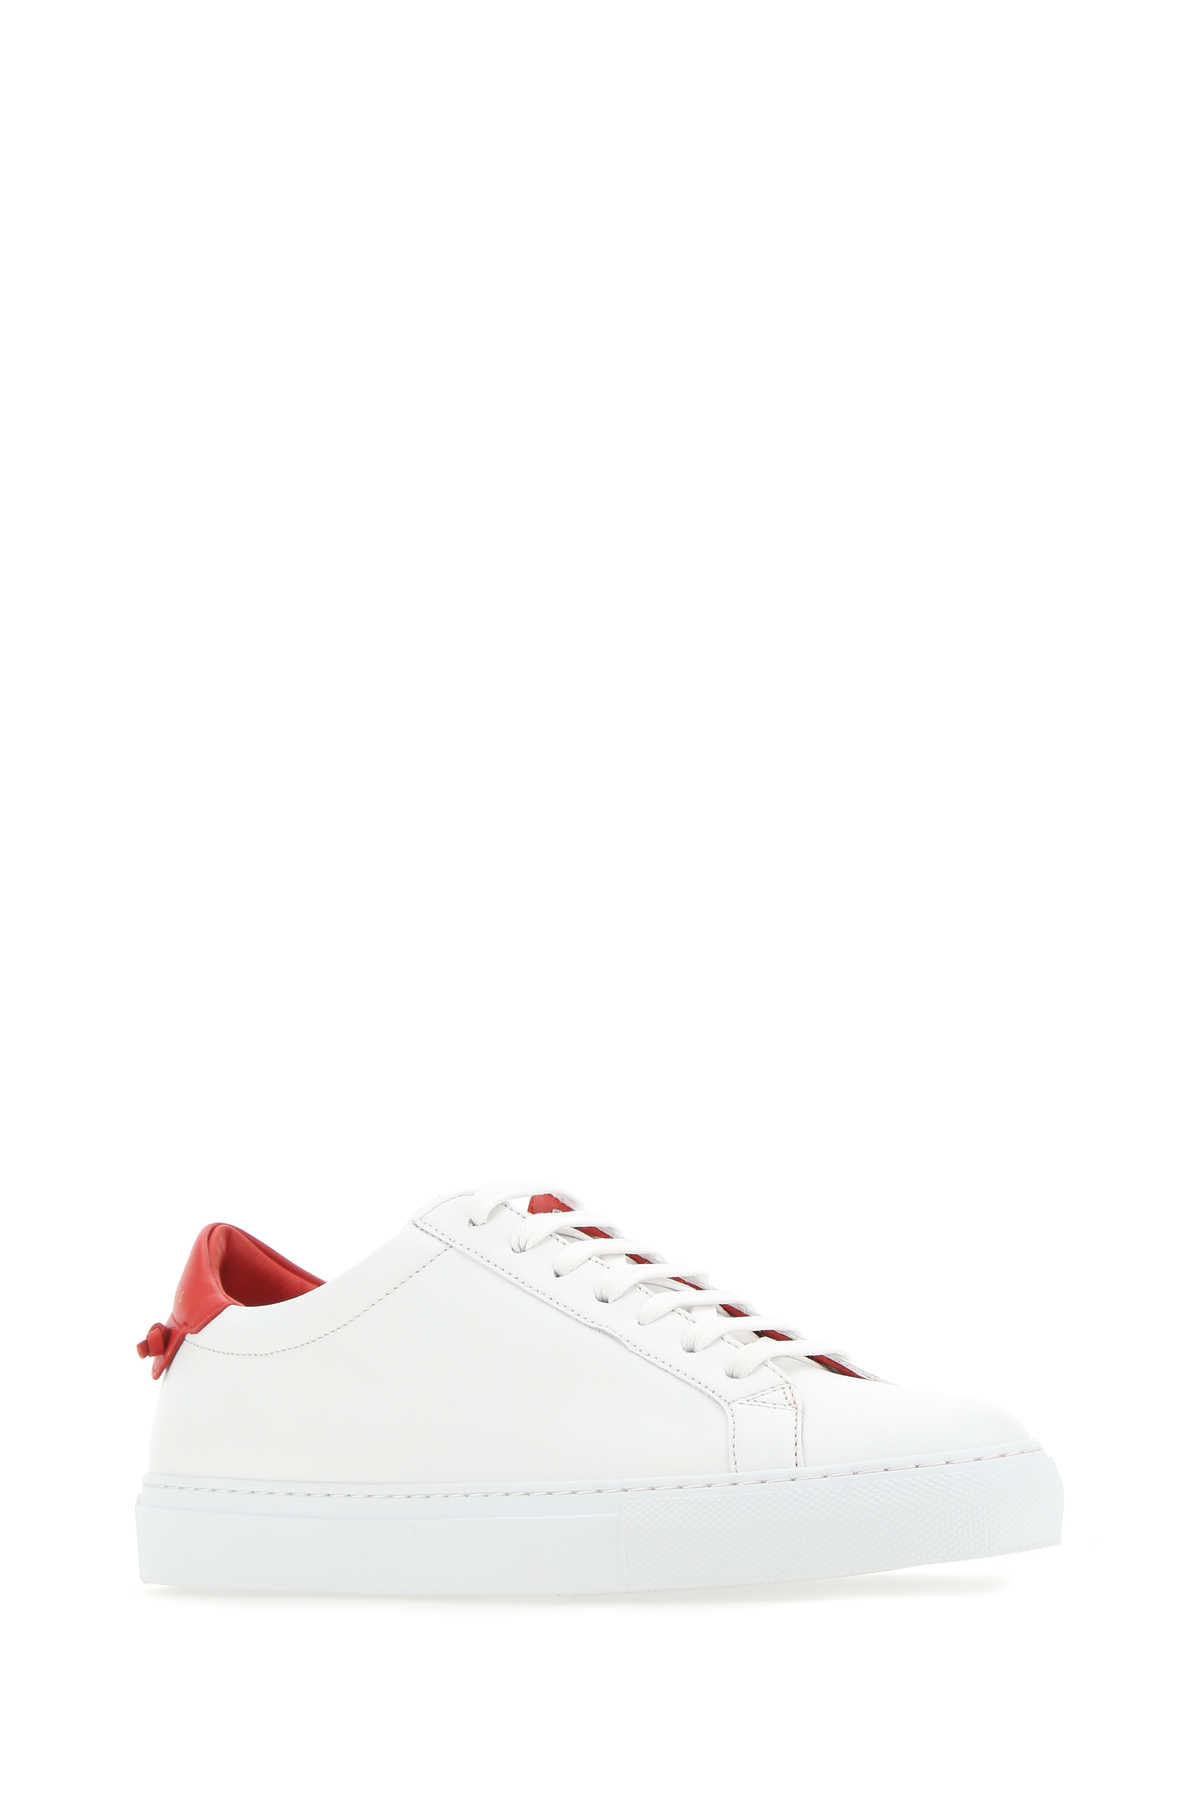 GIVENCHY WHITE LEATHER URBAN STREET SNEAKERS